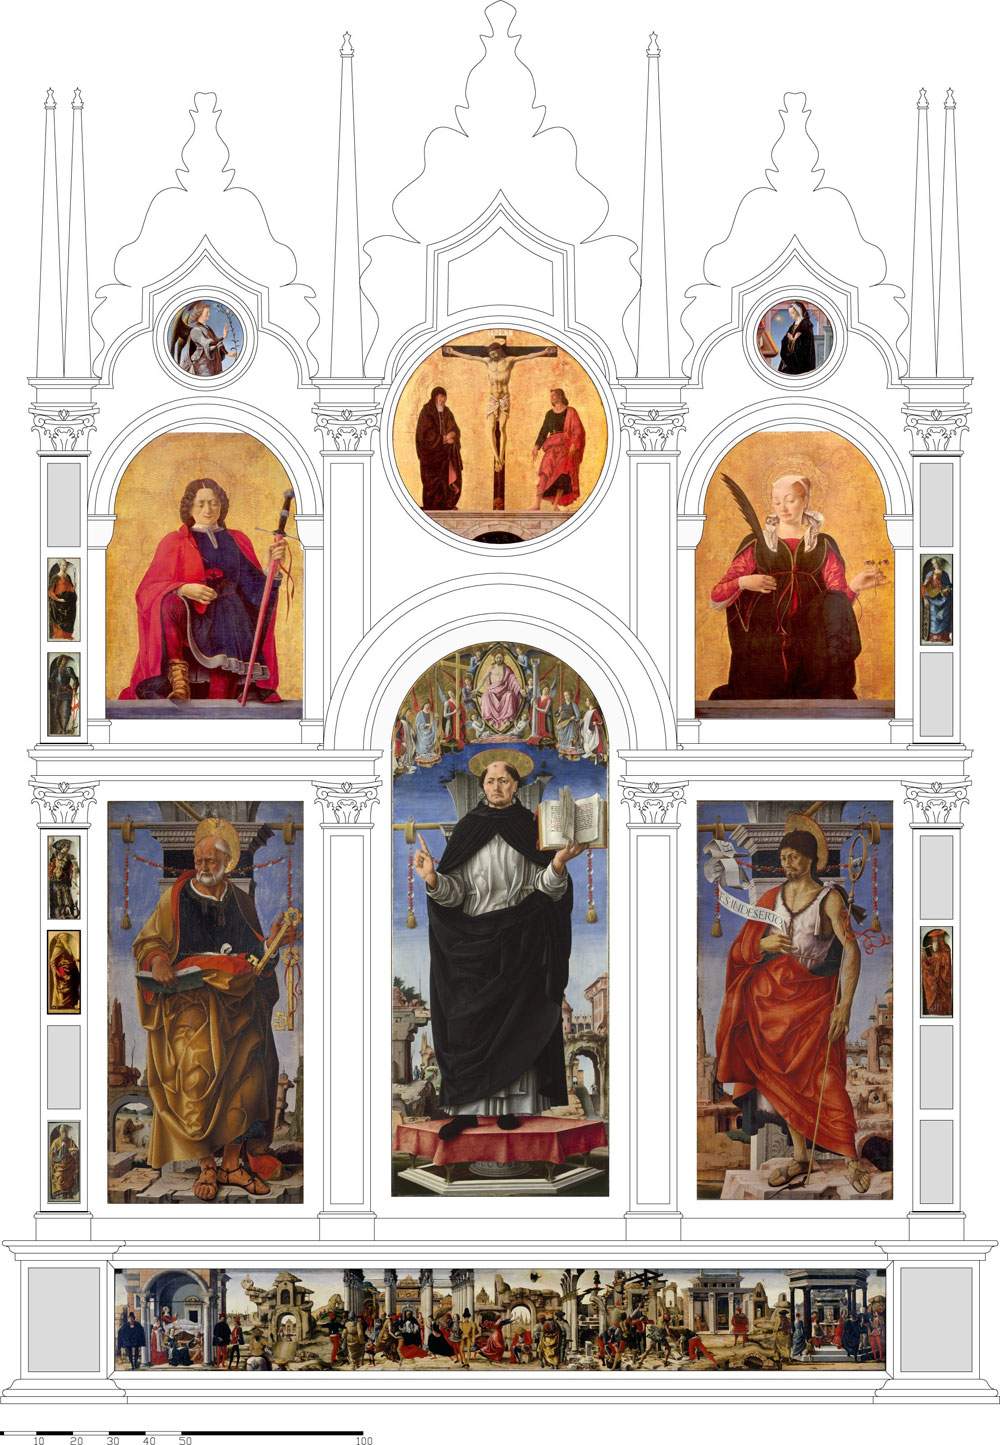 The two missing works of the Griffoni Polyptych arrived from the Louvre. It will now be visible in full